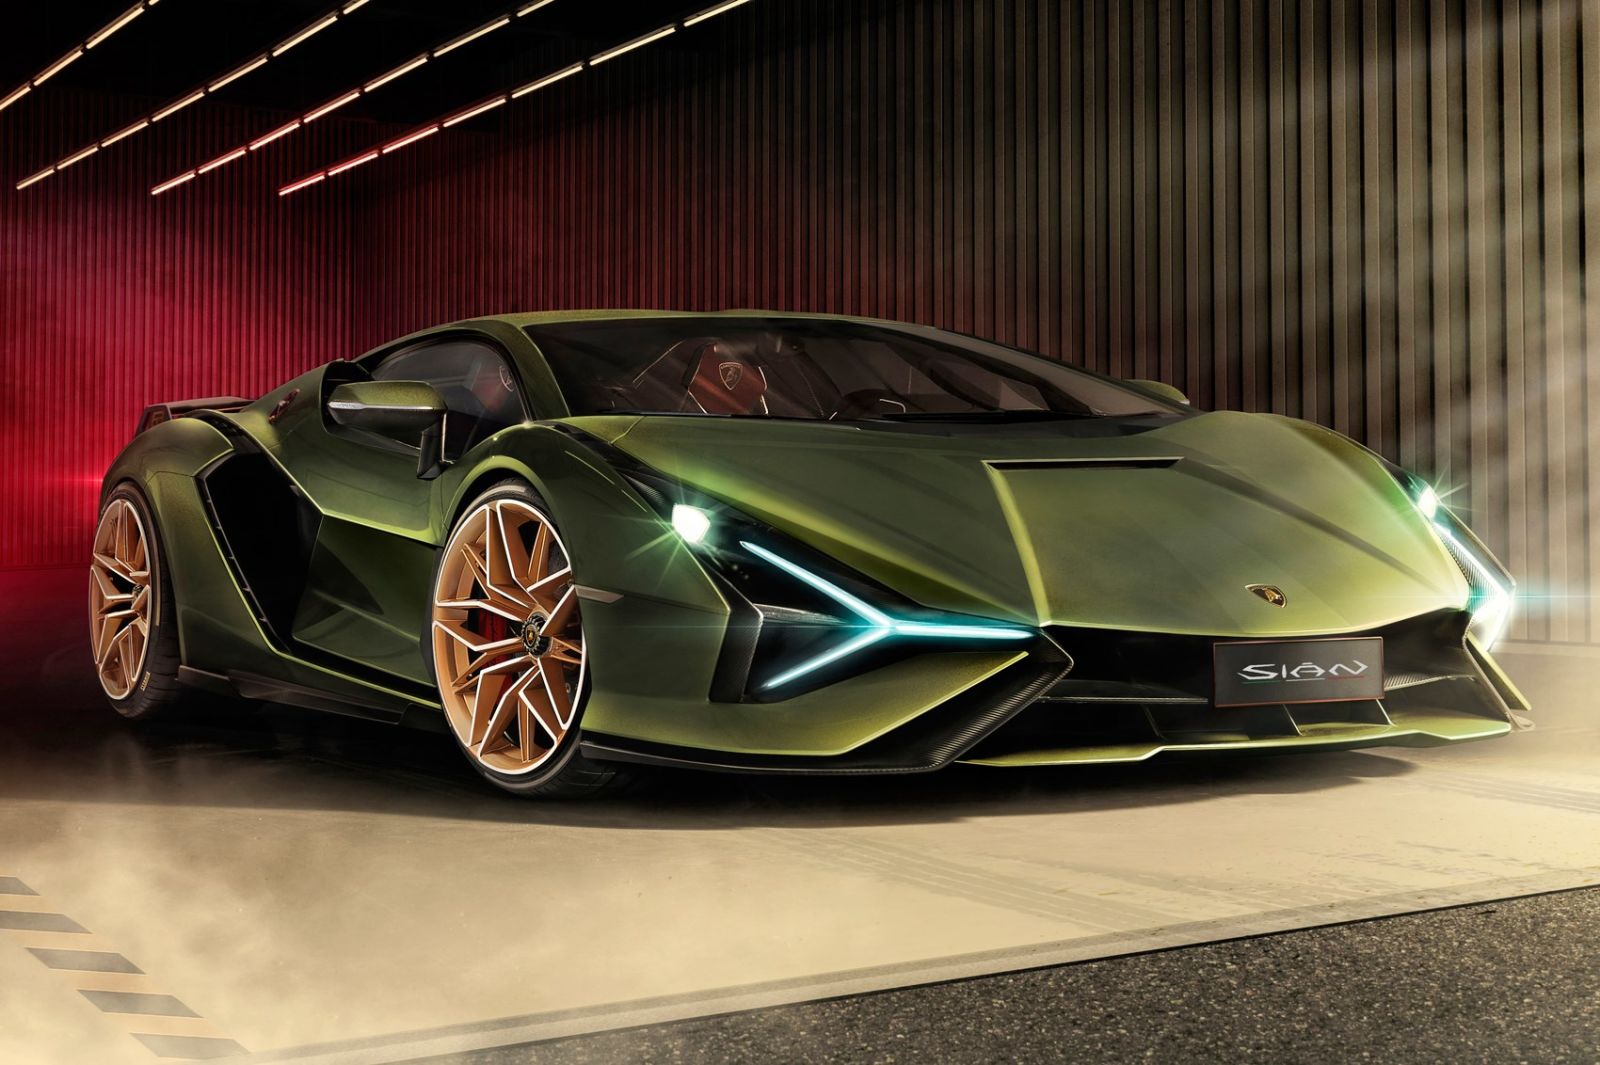 Illustration for article titled Next year marks the 10th birthday of the Aventador